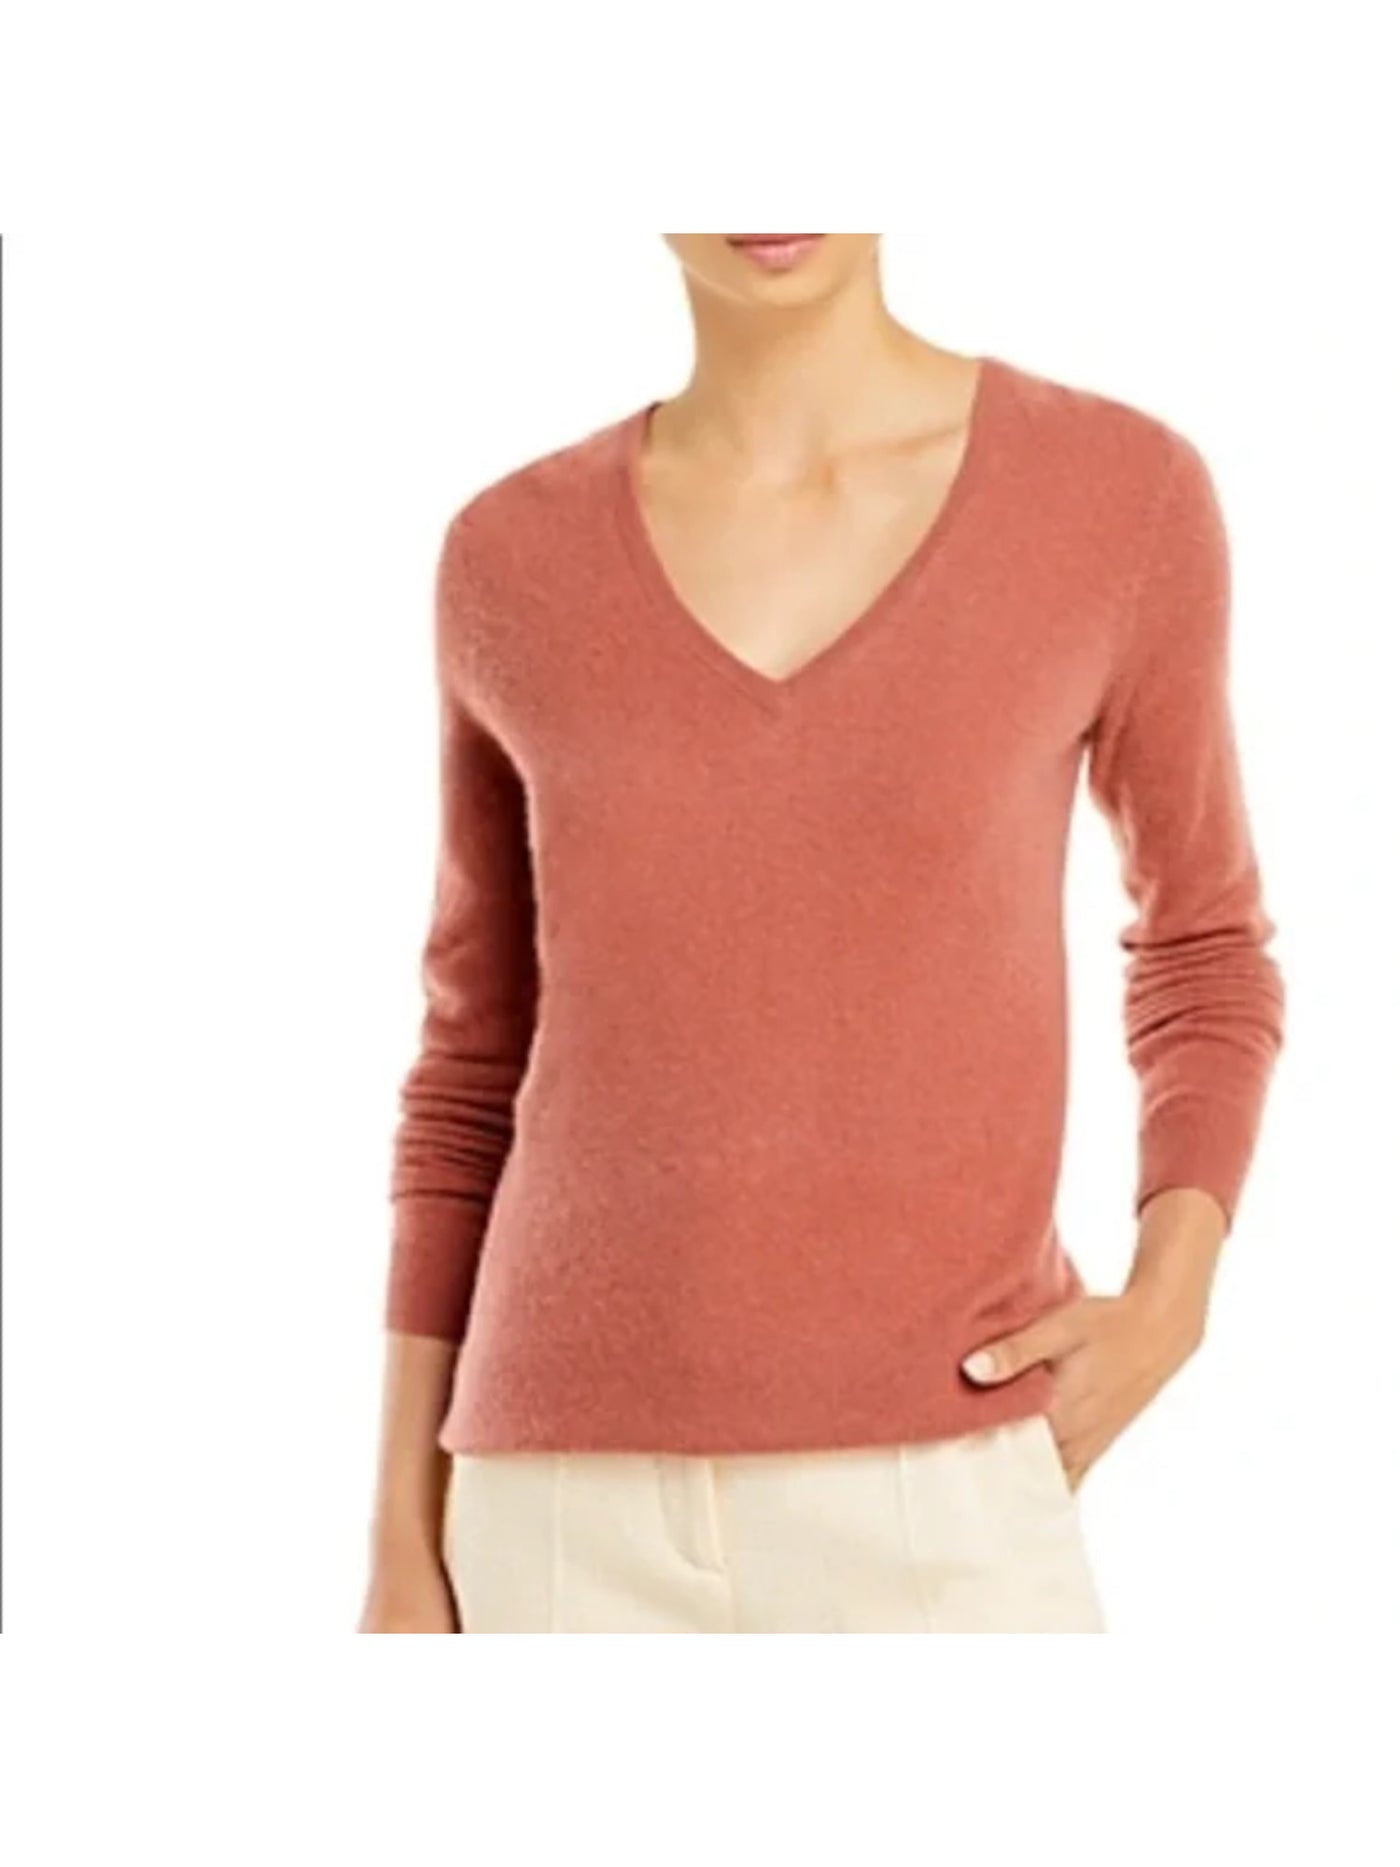 Designer Brand Womens Coral Cashmere Long Sleeve V Neck Wear To Work Sweater M